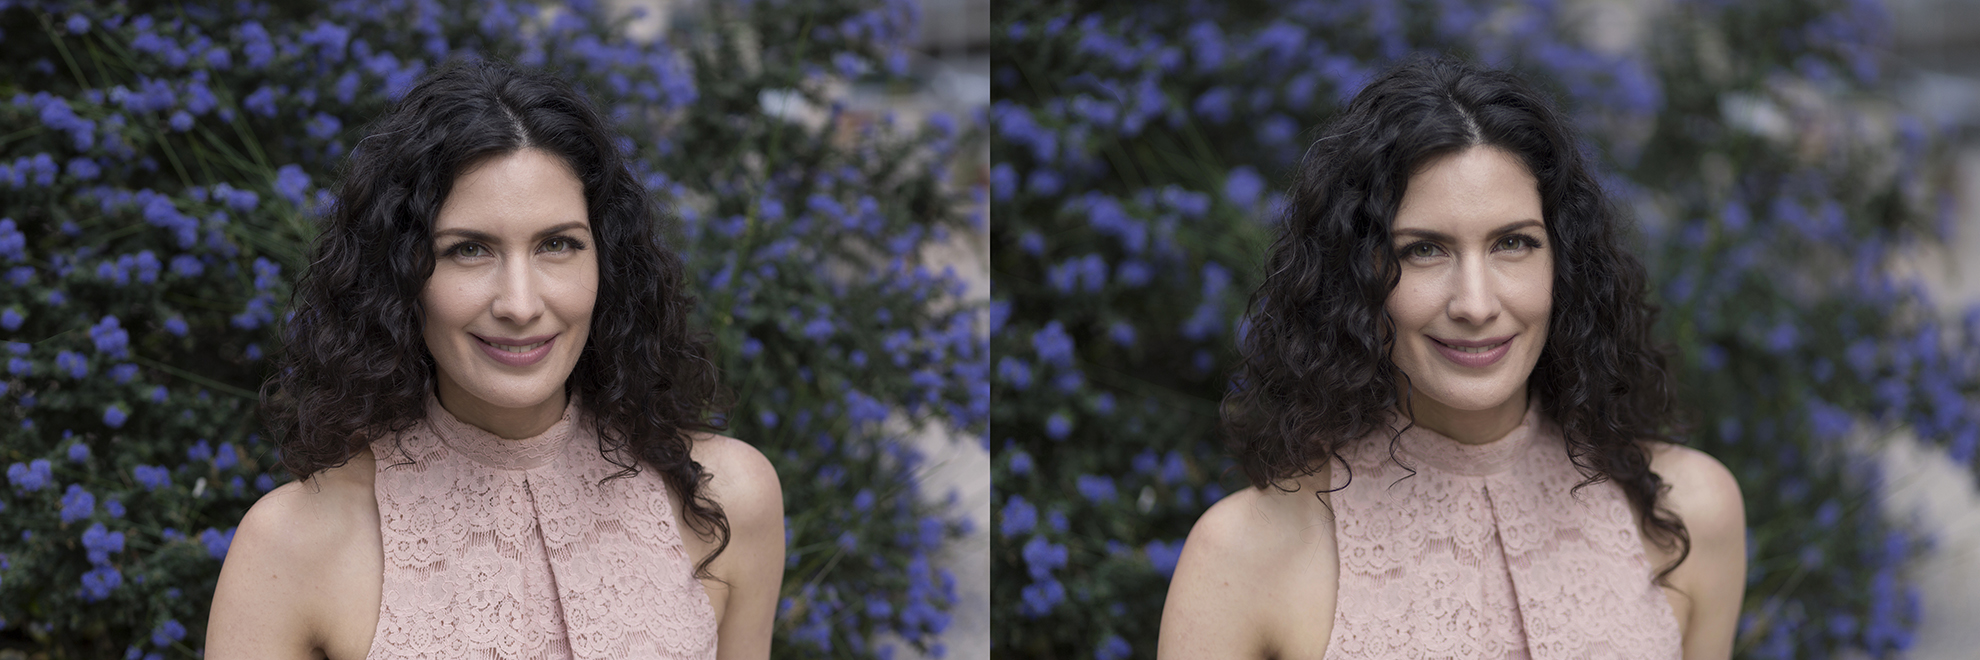 Two portraits of a woman using two different lenses